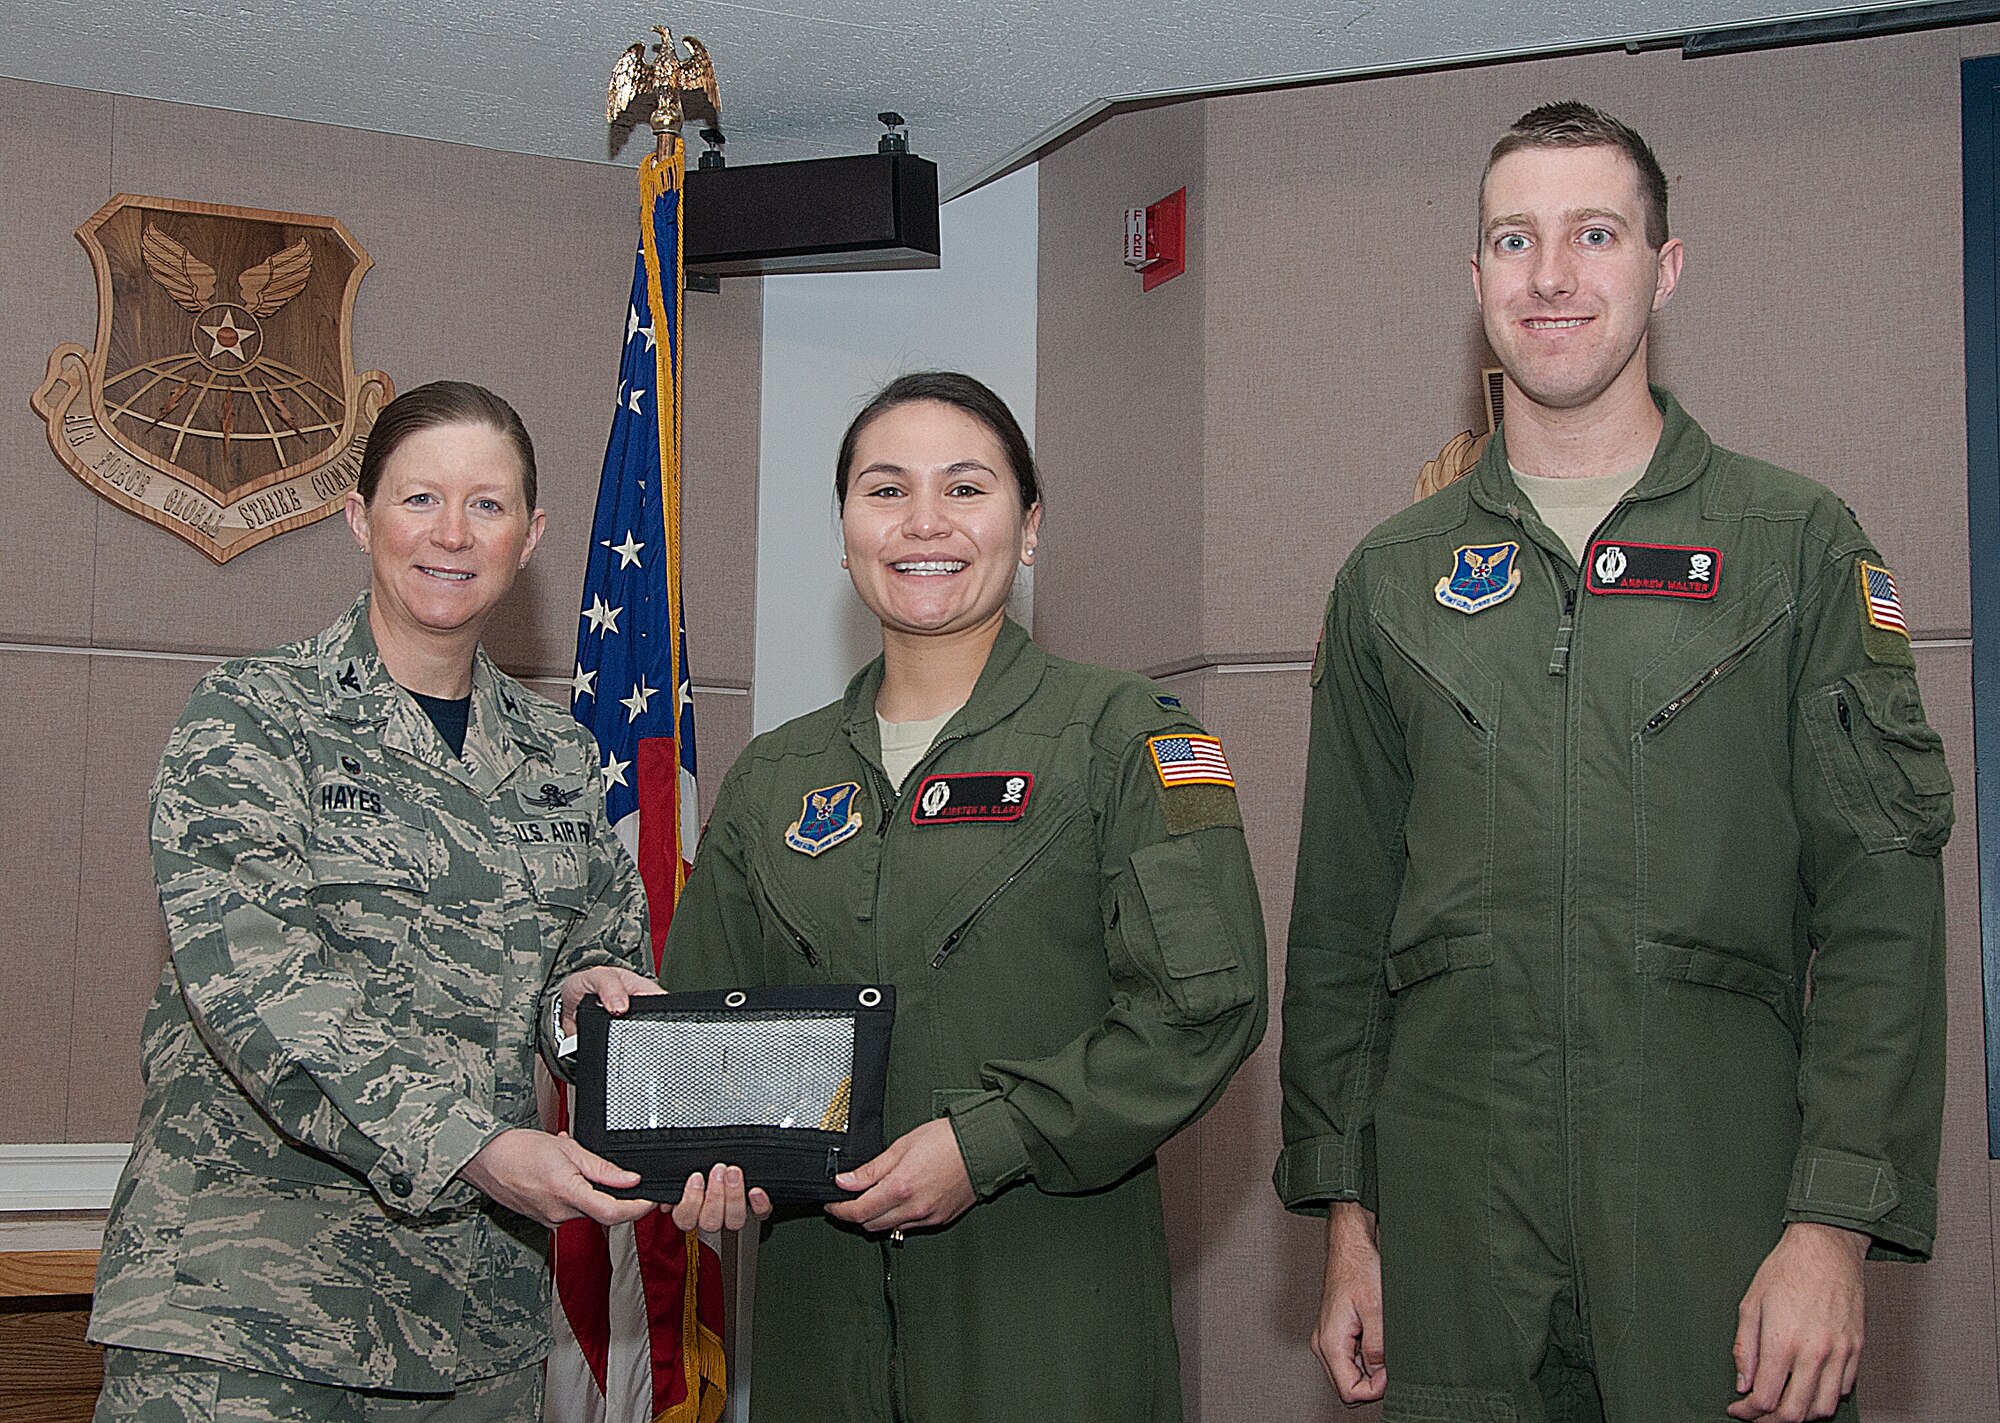 141205-F-GZ967-001 1st Lts. Kristen Clark and Andre Walter, 320th Missile Squadron missileers, pose with Col. Tracey Hayes, 90th Missile Wing commander, as she presents them the keys to a new government-owned vehicle Dec. 5, 2014, in the 90th Operations Group pre-departure room, F.E. Warren Air Force Base, Wyo. Warren received a total of 26 new trucks as part of the Force Improvement Program’s initiative to provide substantial changes within the ICBM missions.  (U.S. Air Force photo/Airman 1st Class Brandon Valle)